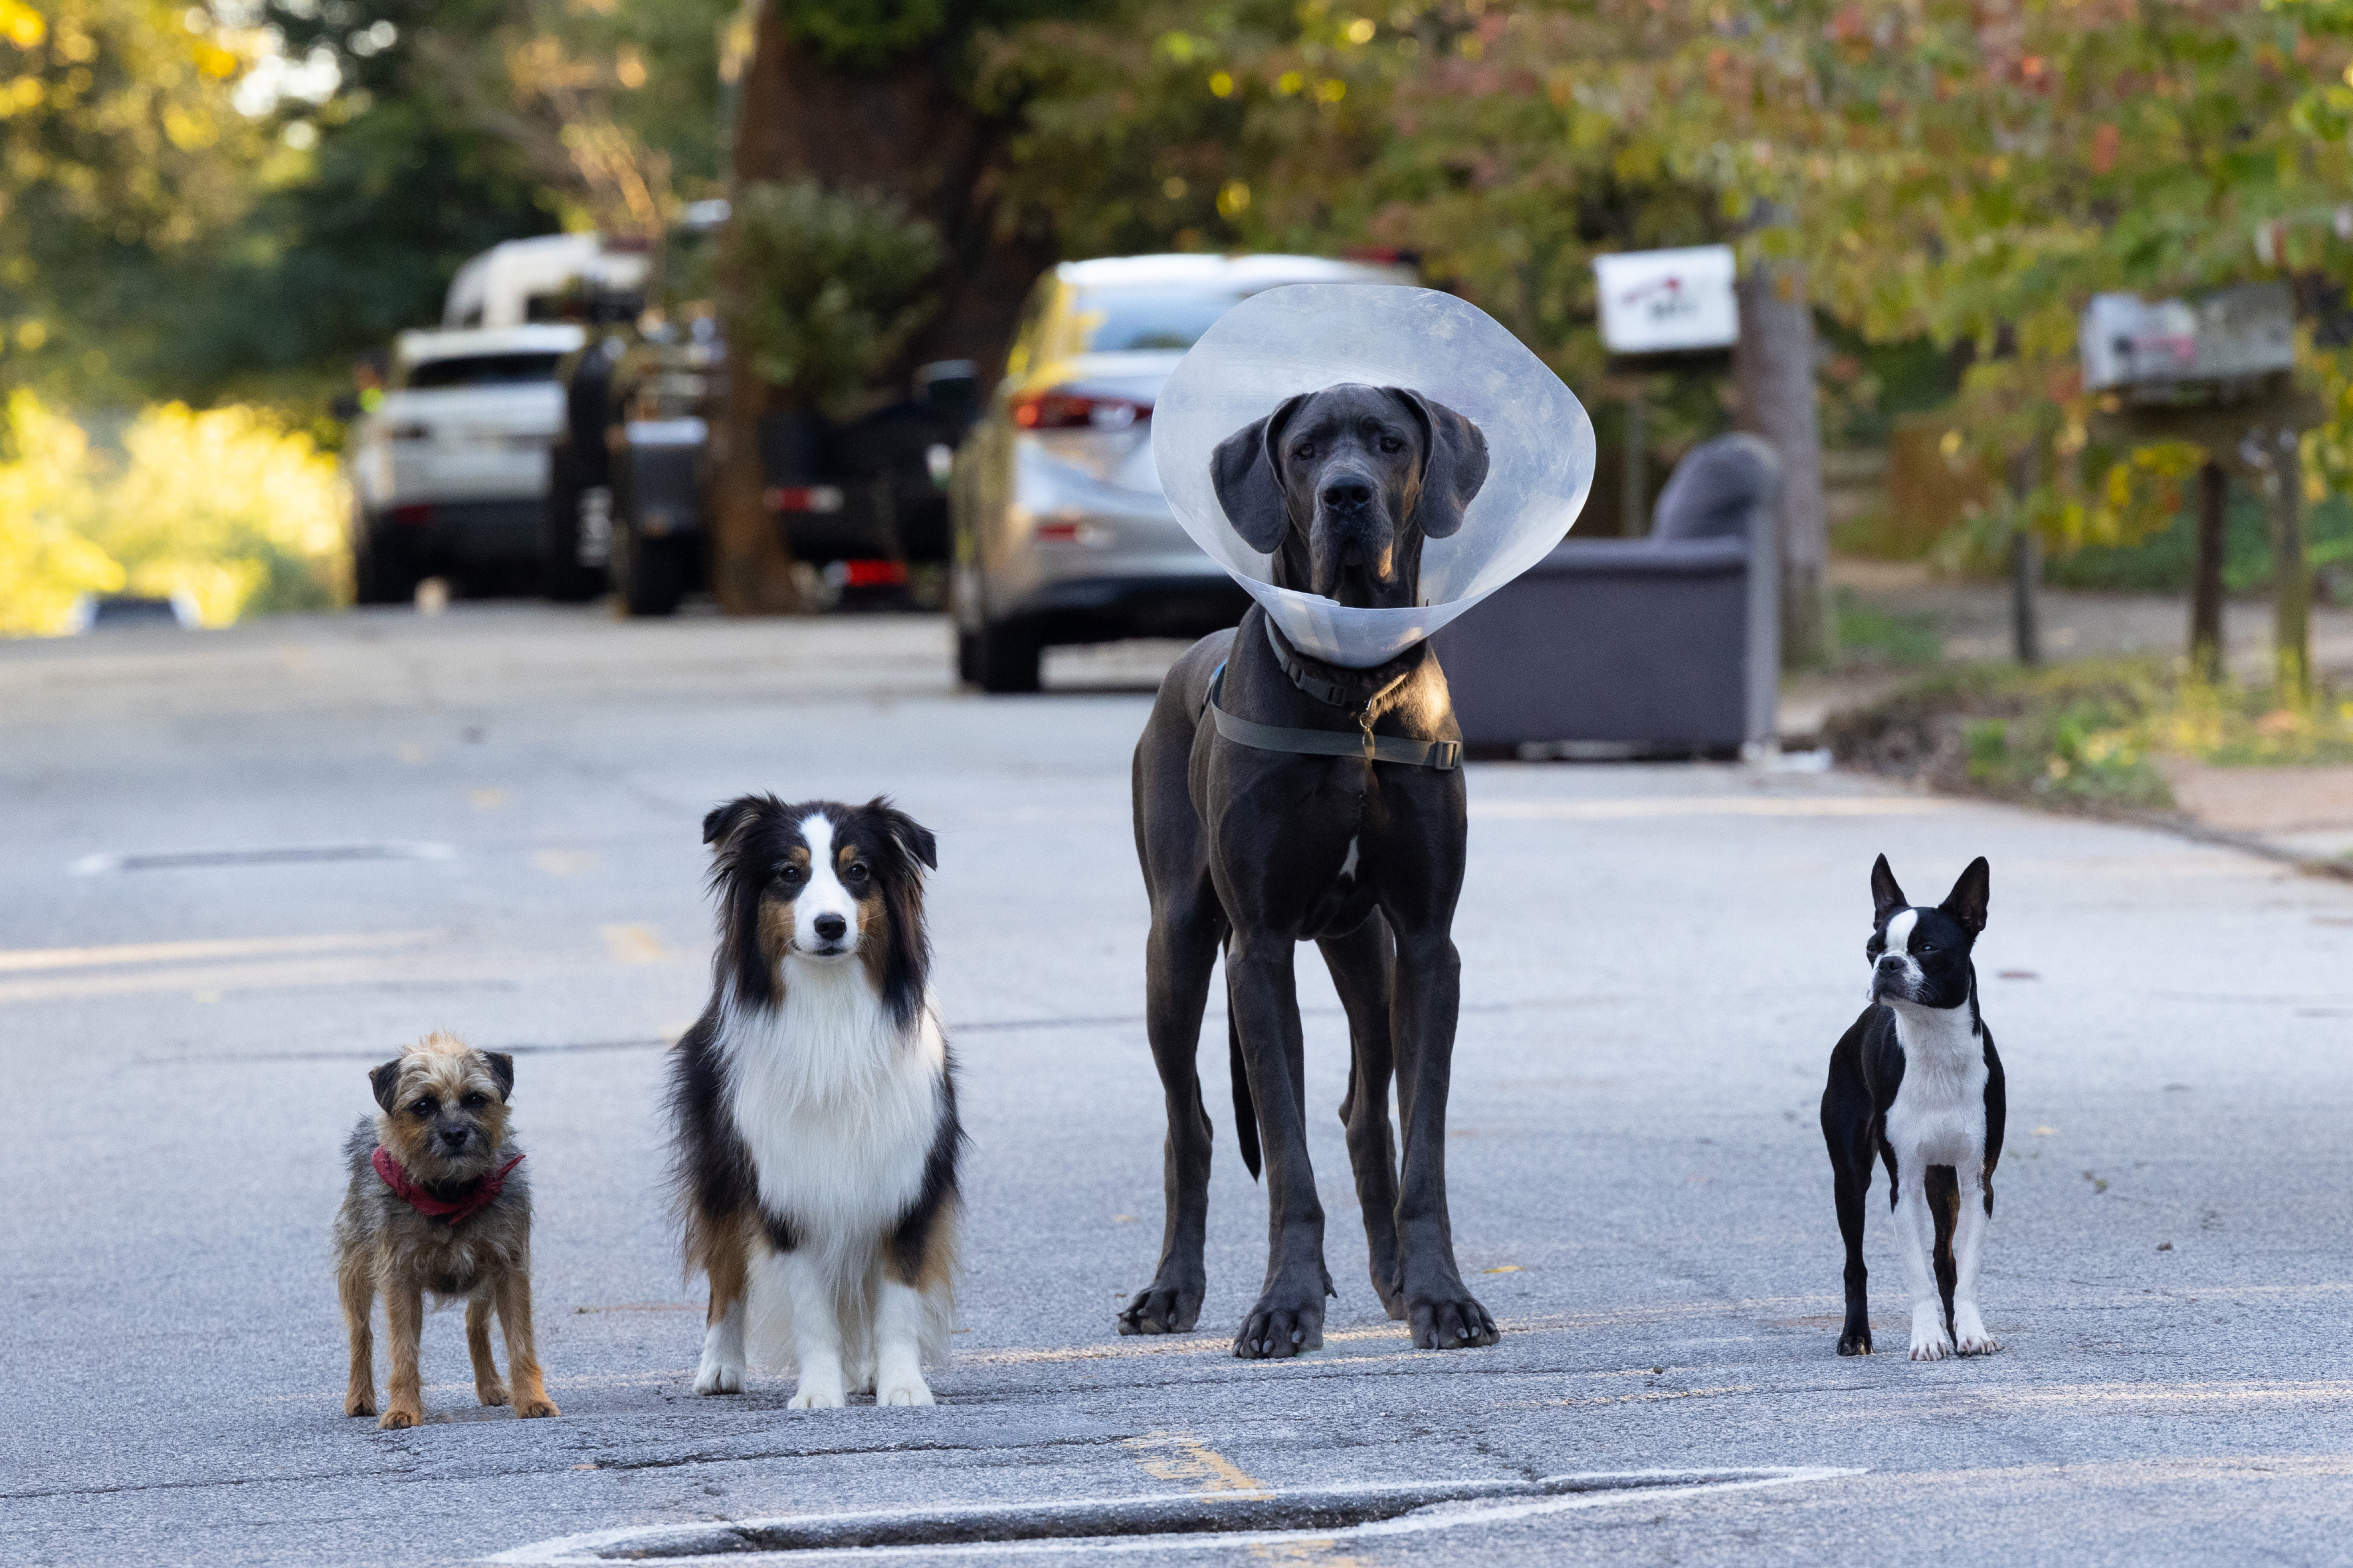 Reggie, Maggie, Hunter, and Bug all stand on the street together in Strays.